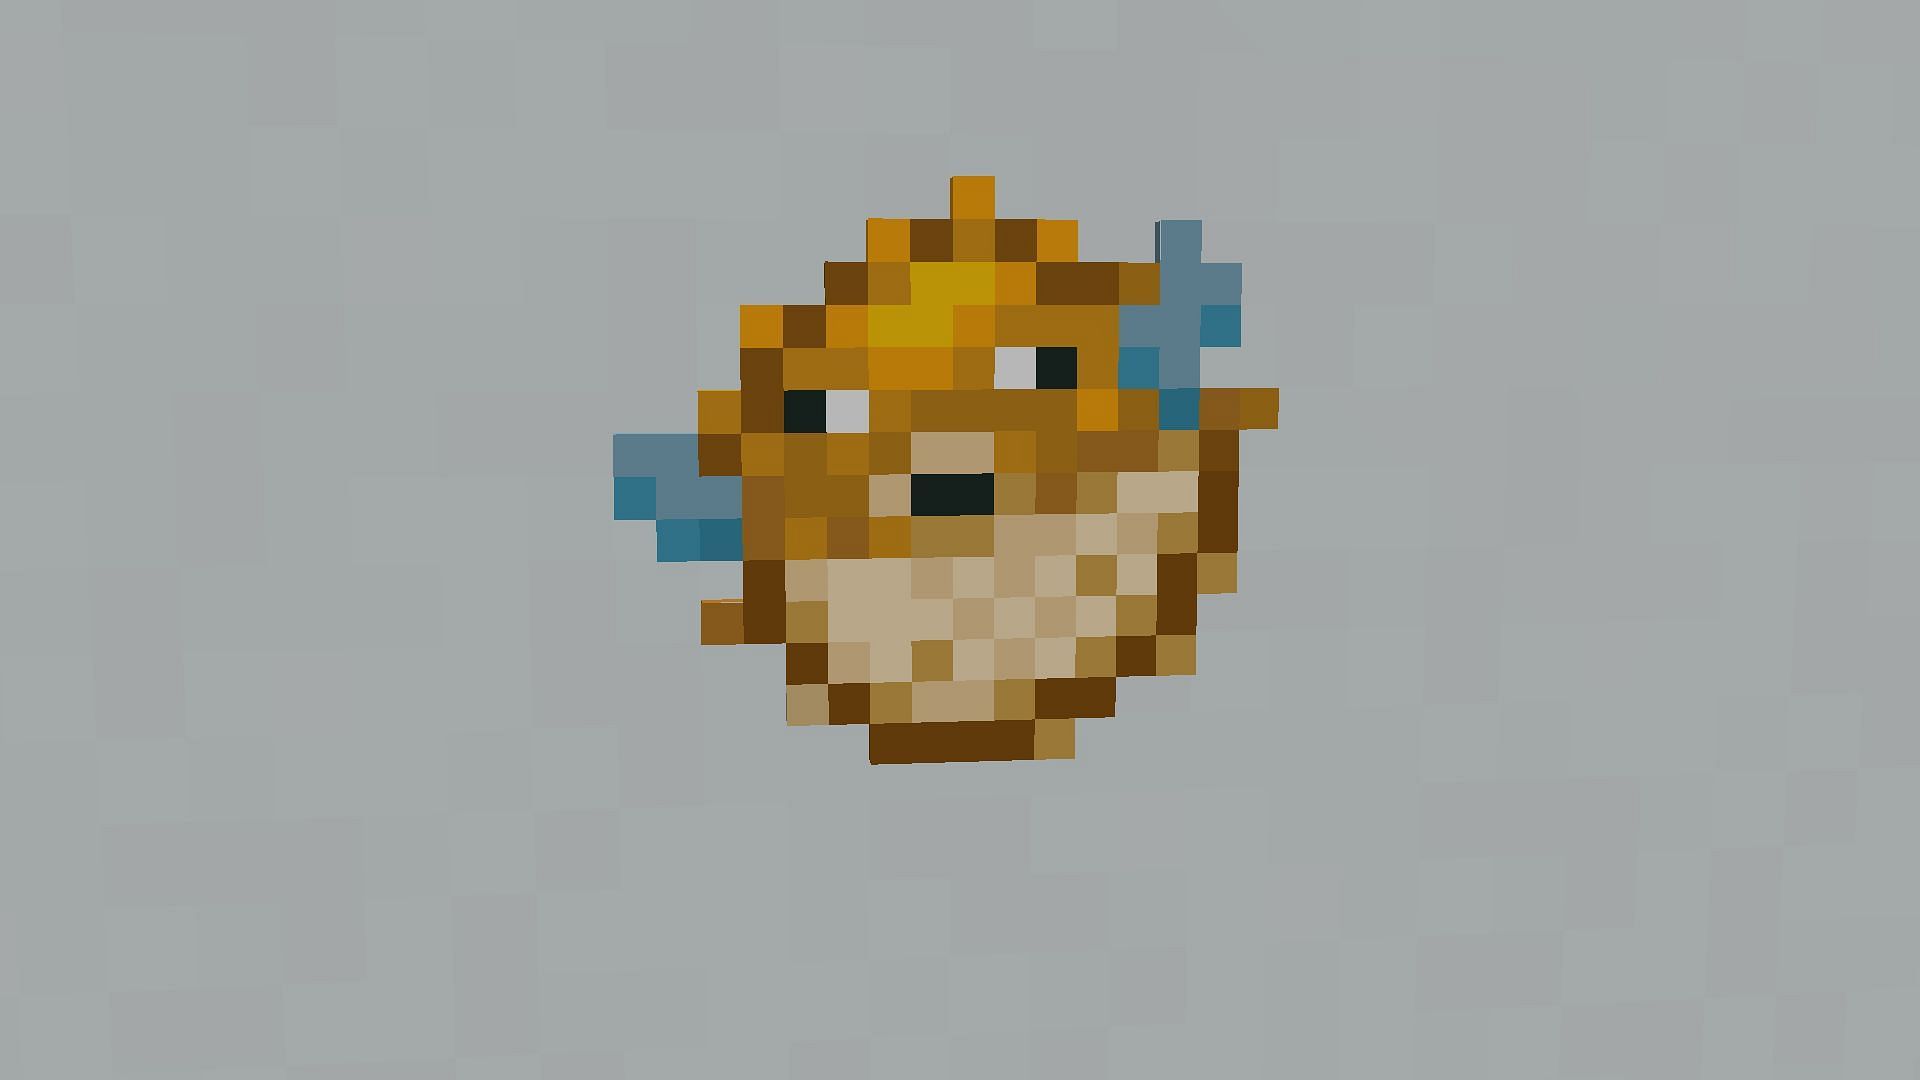 Pufferfish applies all kinds of problematic status effects when Minecraft players eat it (Image via Mojang)